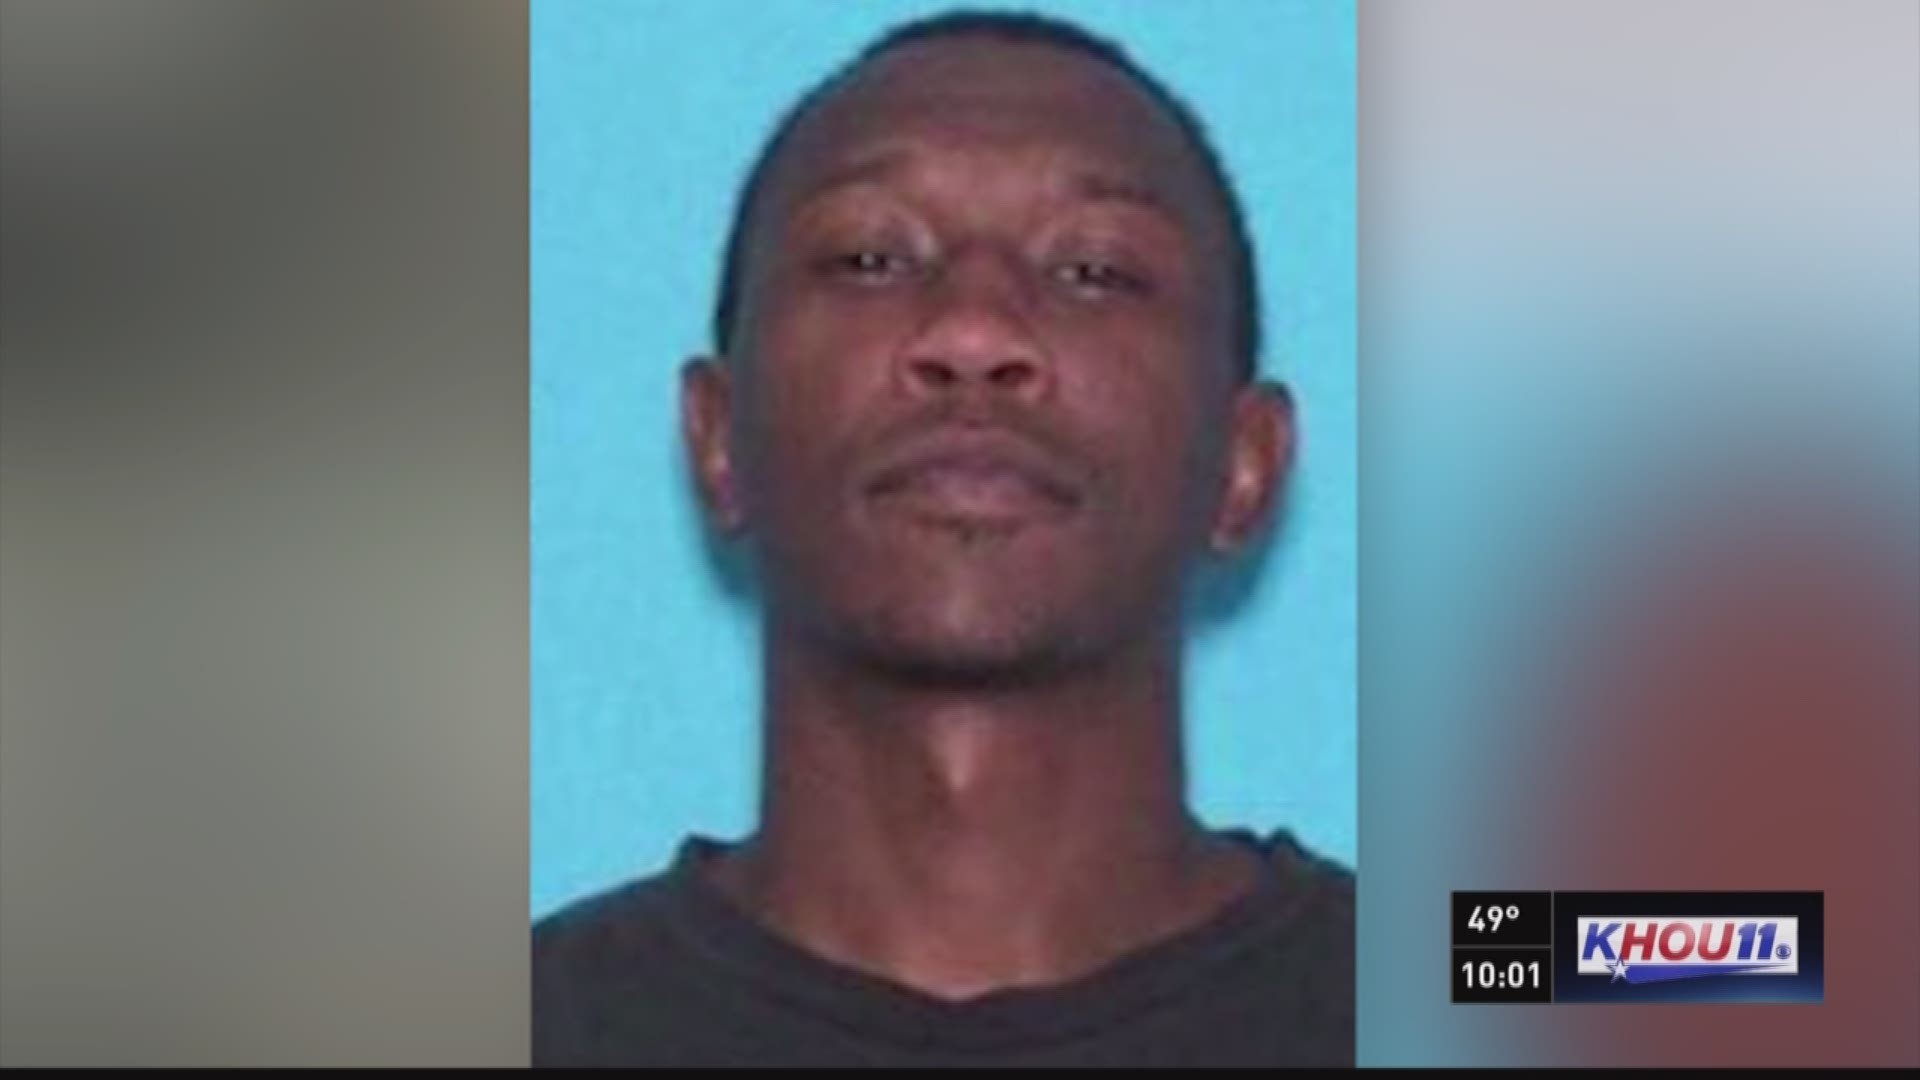 In Waller County Thursday evening, authorities arrested a man accused of shooting and killing a state trooper near Fairfield several hours earlier.